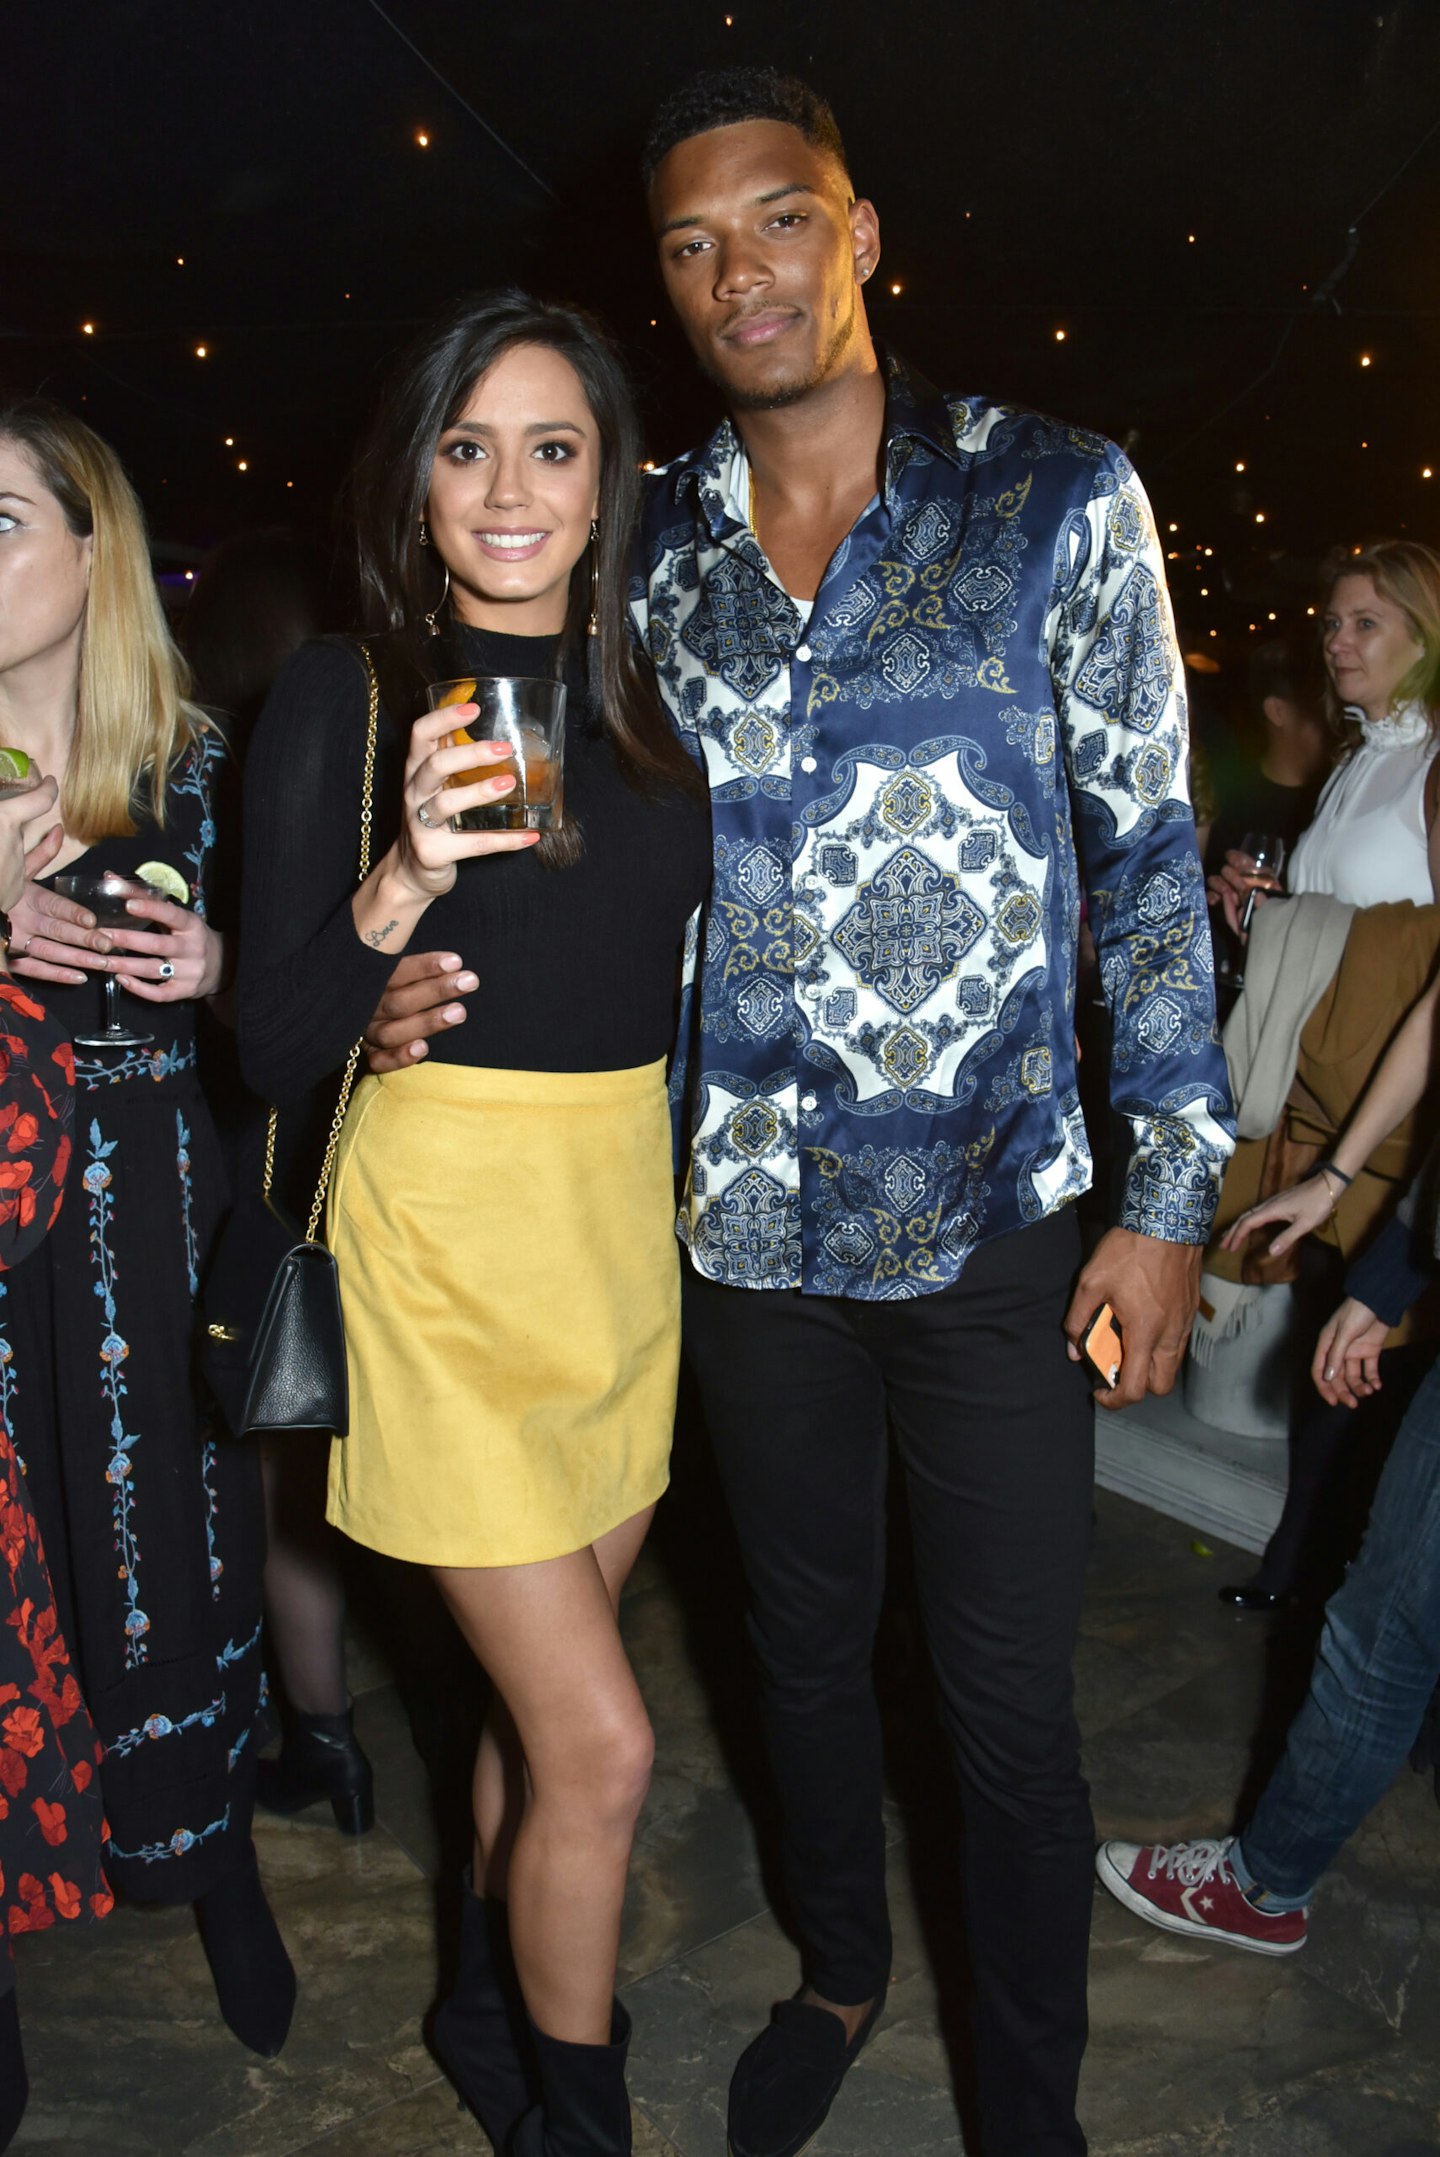 theo campbell and tyla carr together at an event